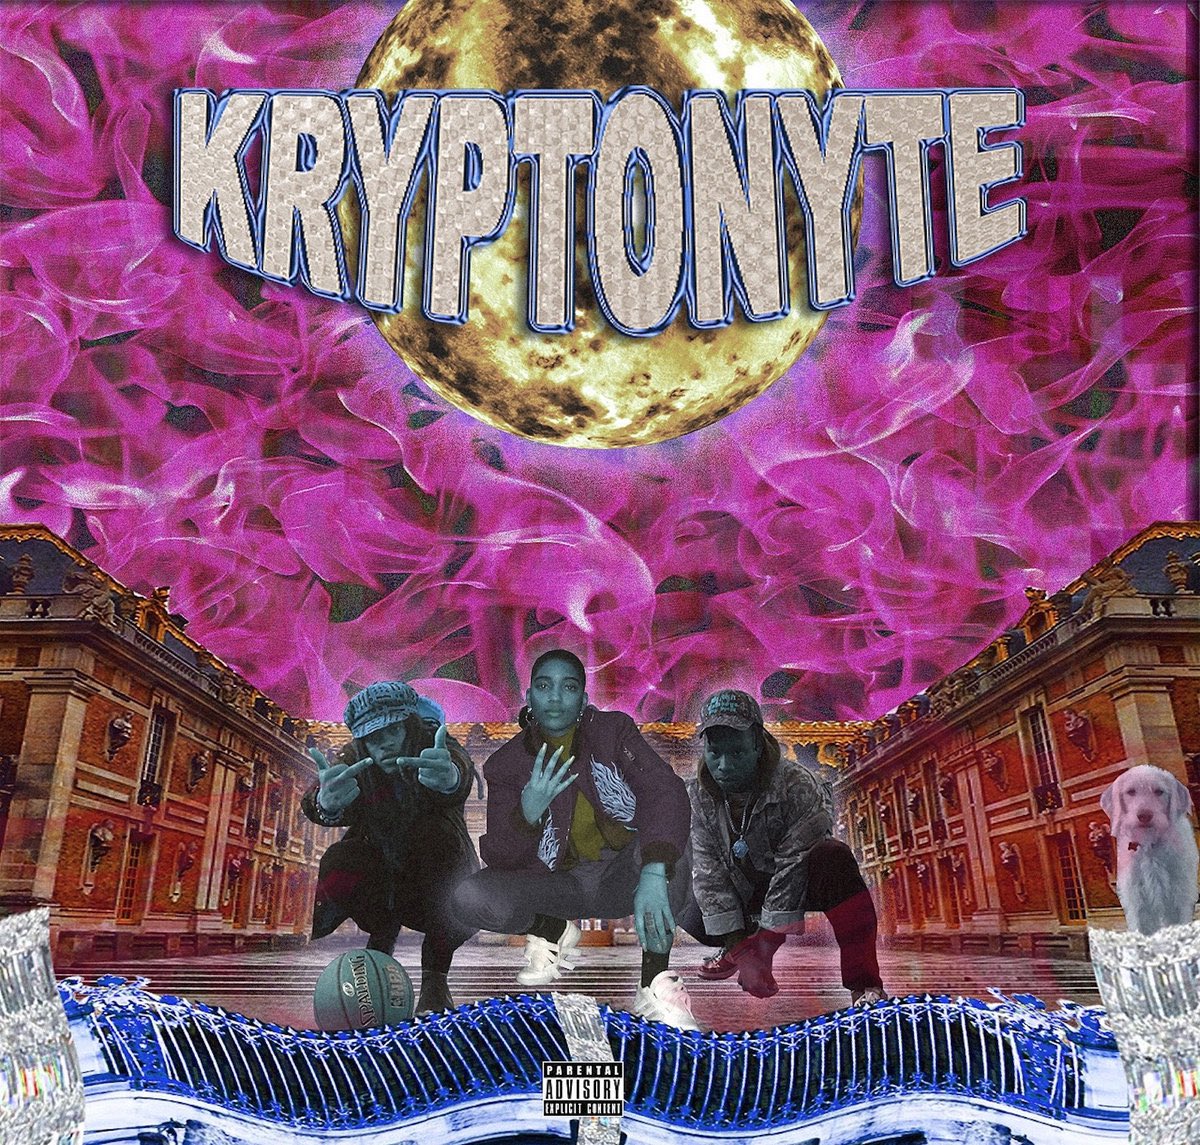 #5 - KRYPTONYTE(2018)This album is just bangers front to back, pulling from that classic Memphis sound this is such a fun listen, liv.e, siifu, bryon, and ben have such great chemistry and this an incredible ode to Memphis.